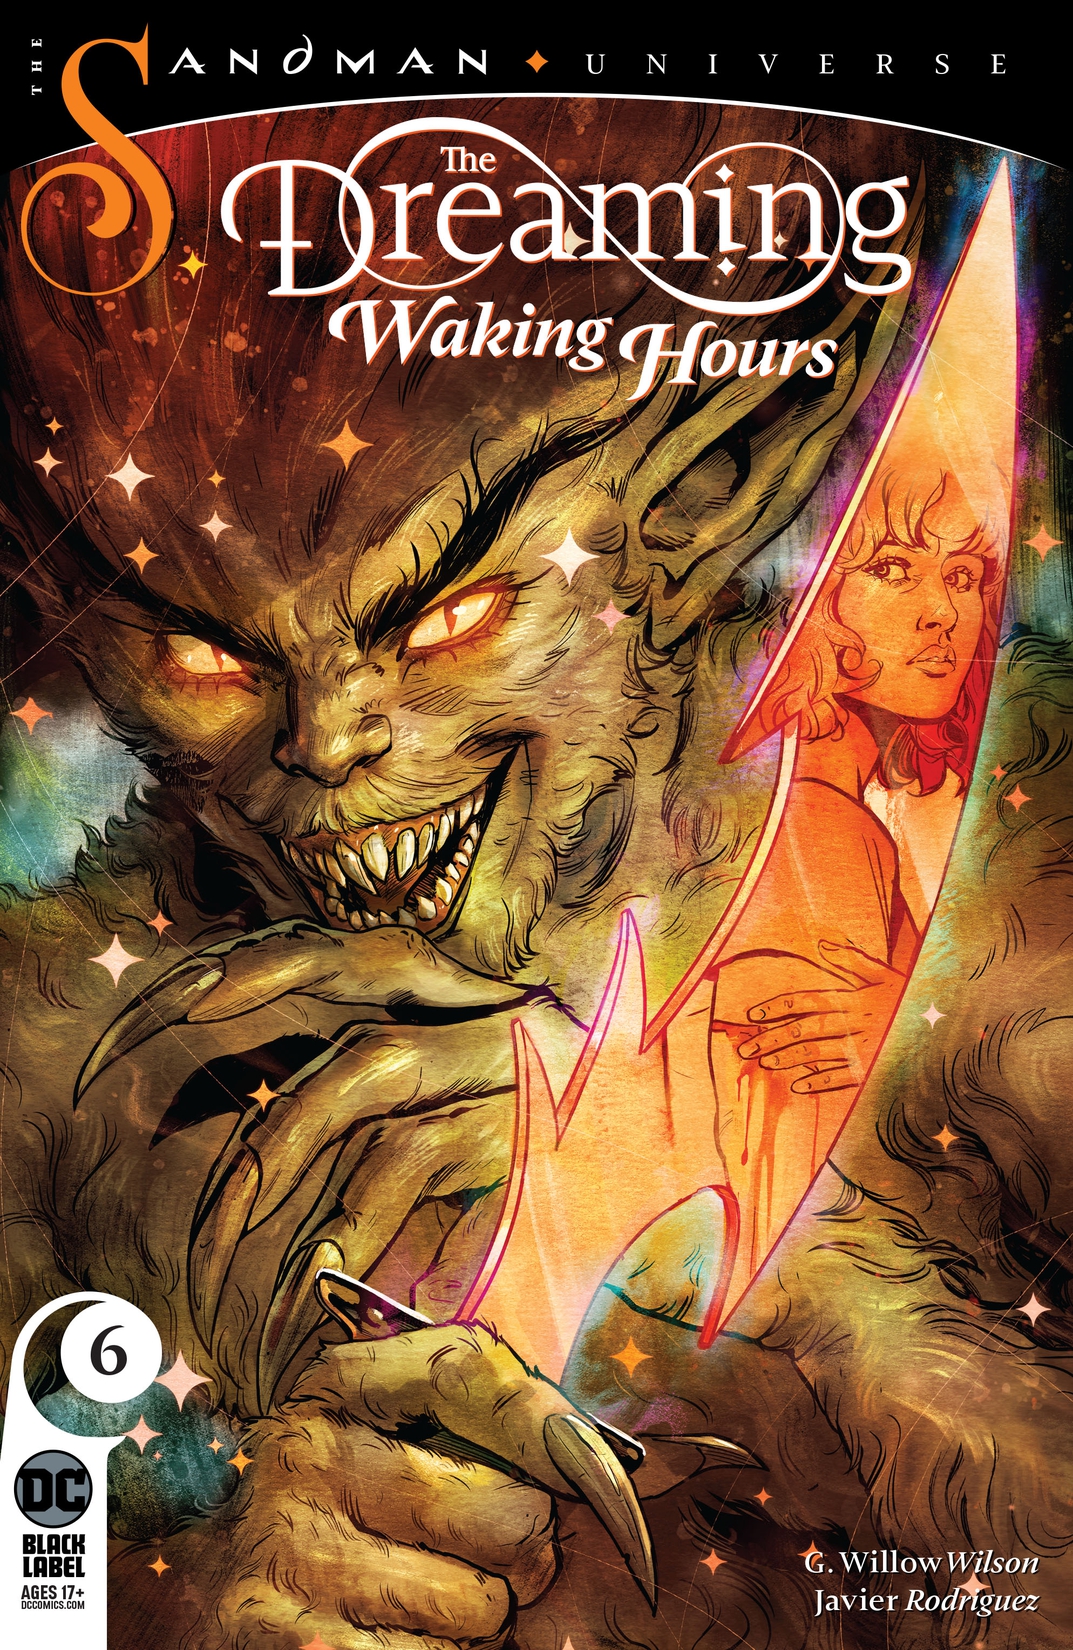 The Dreaming: Waking Hours #6 preview images